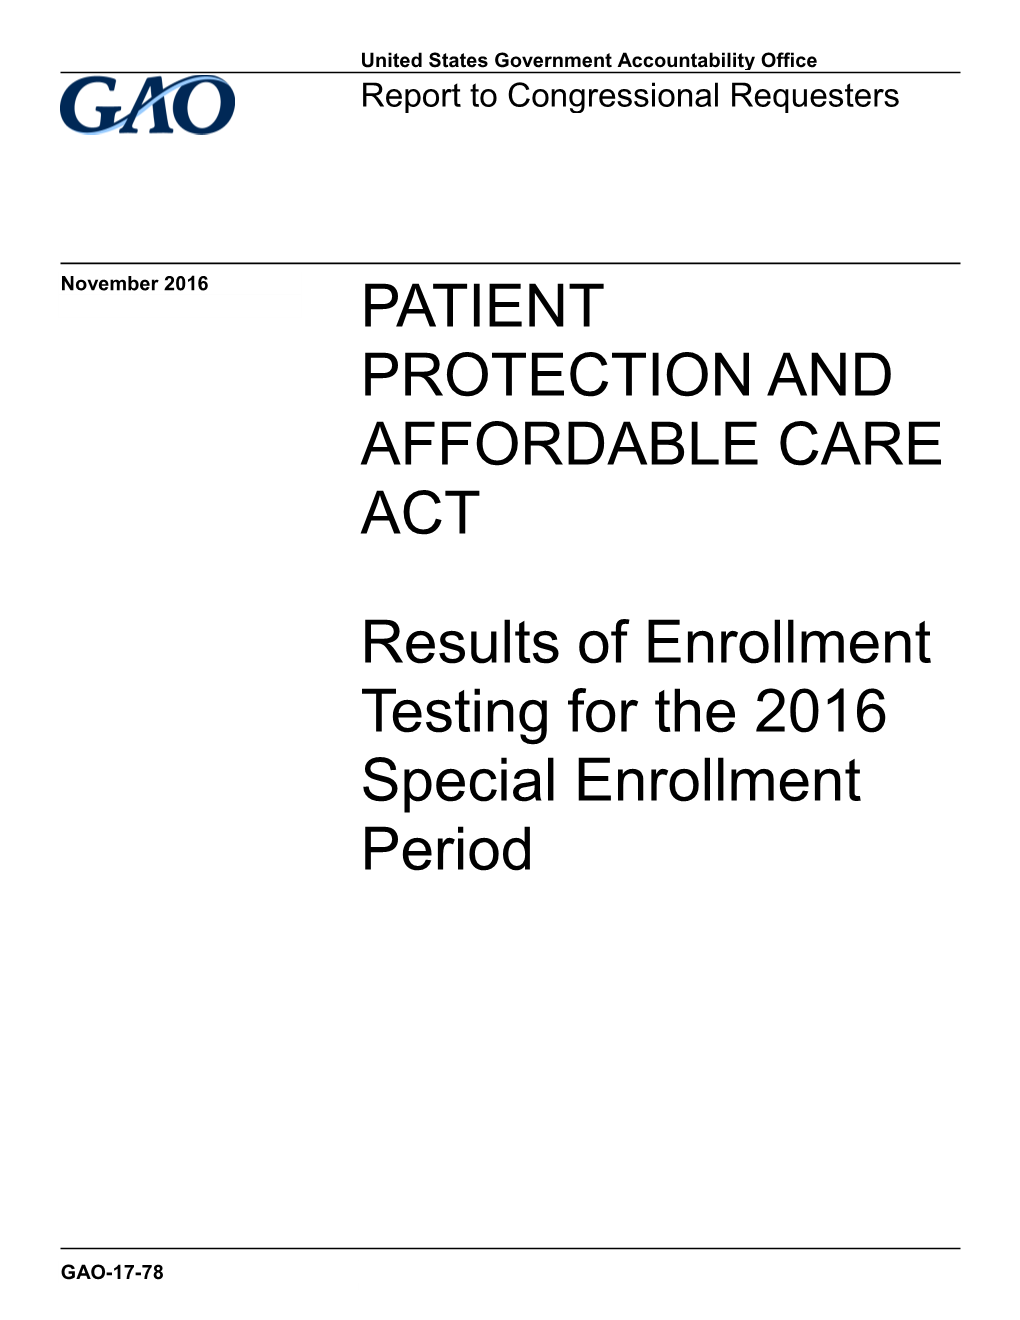 Gao-17-78, Patient Protection